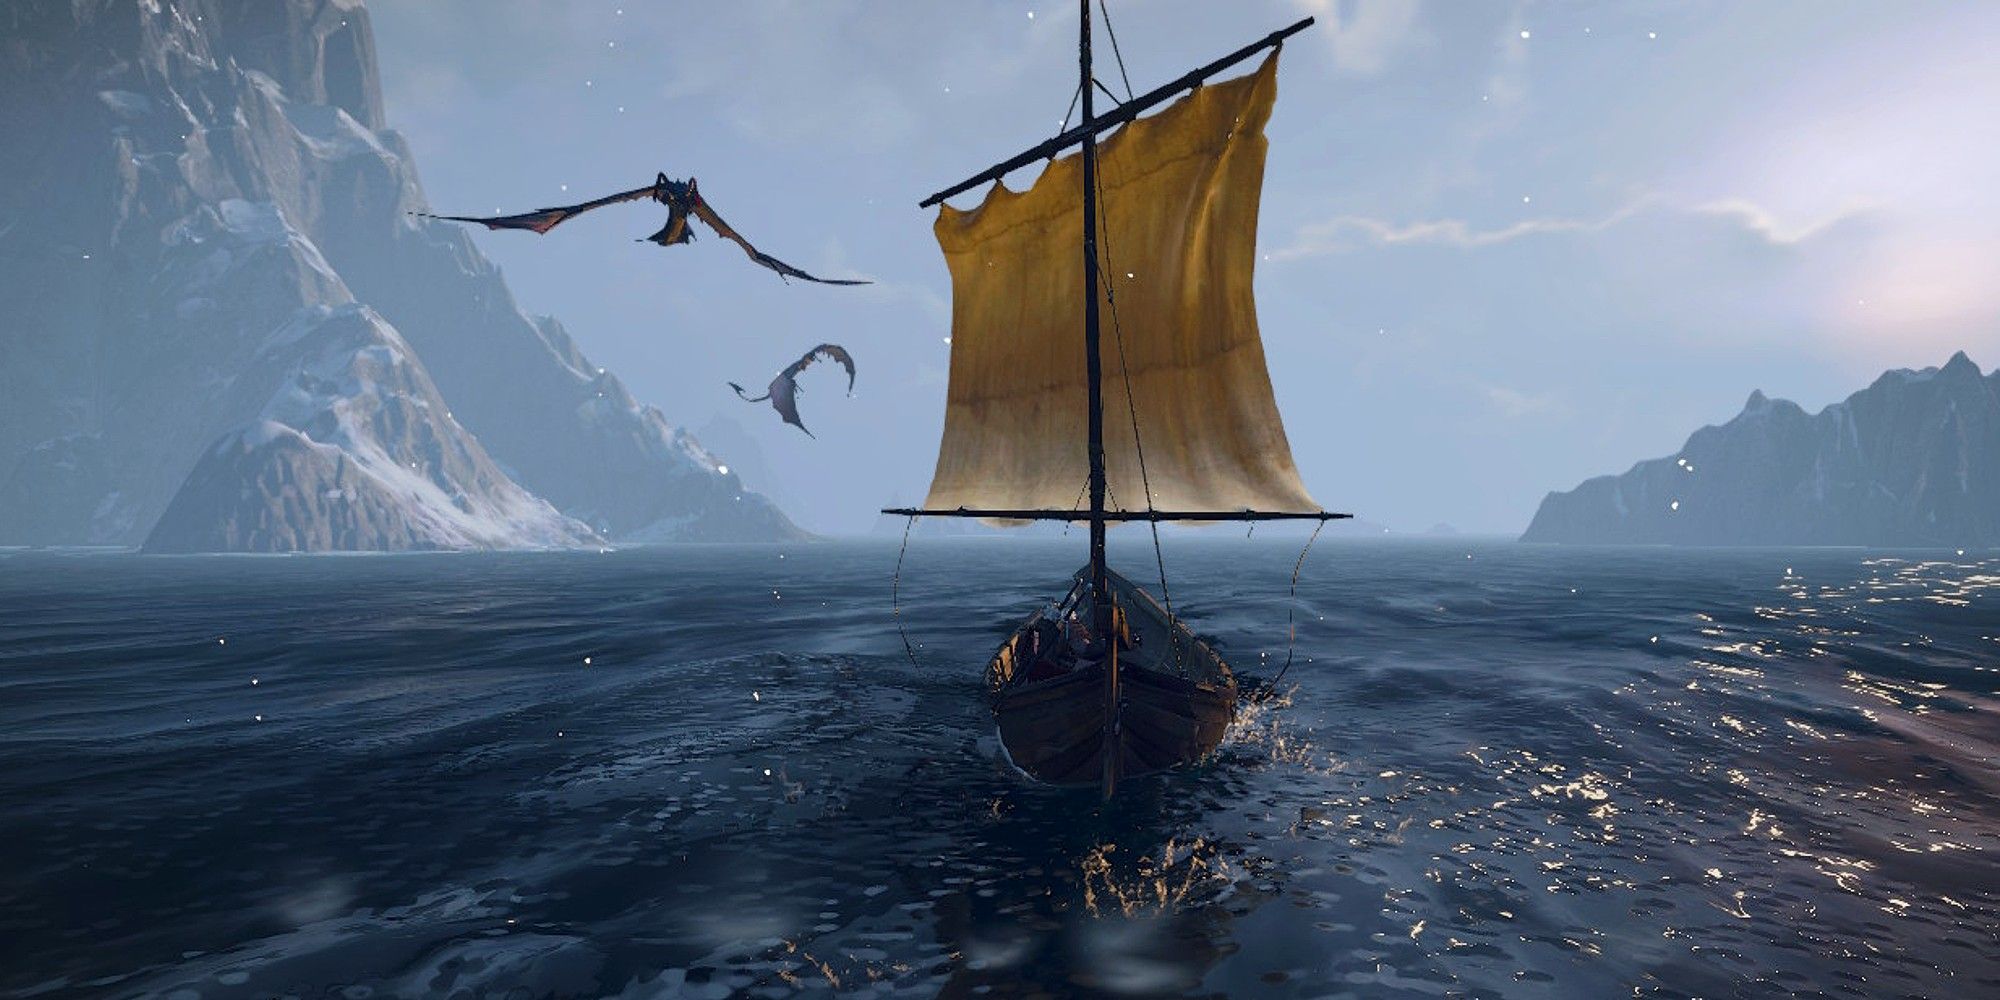 Geralt From Witcher 3 Explores Skellige Points Of Interest On The Boat